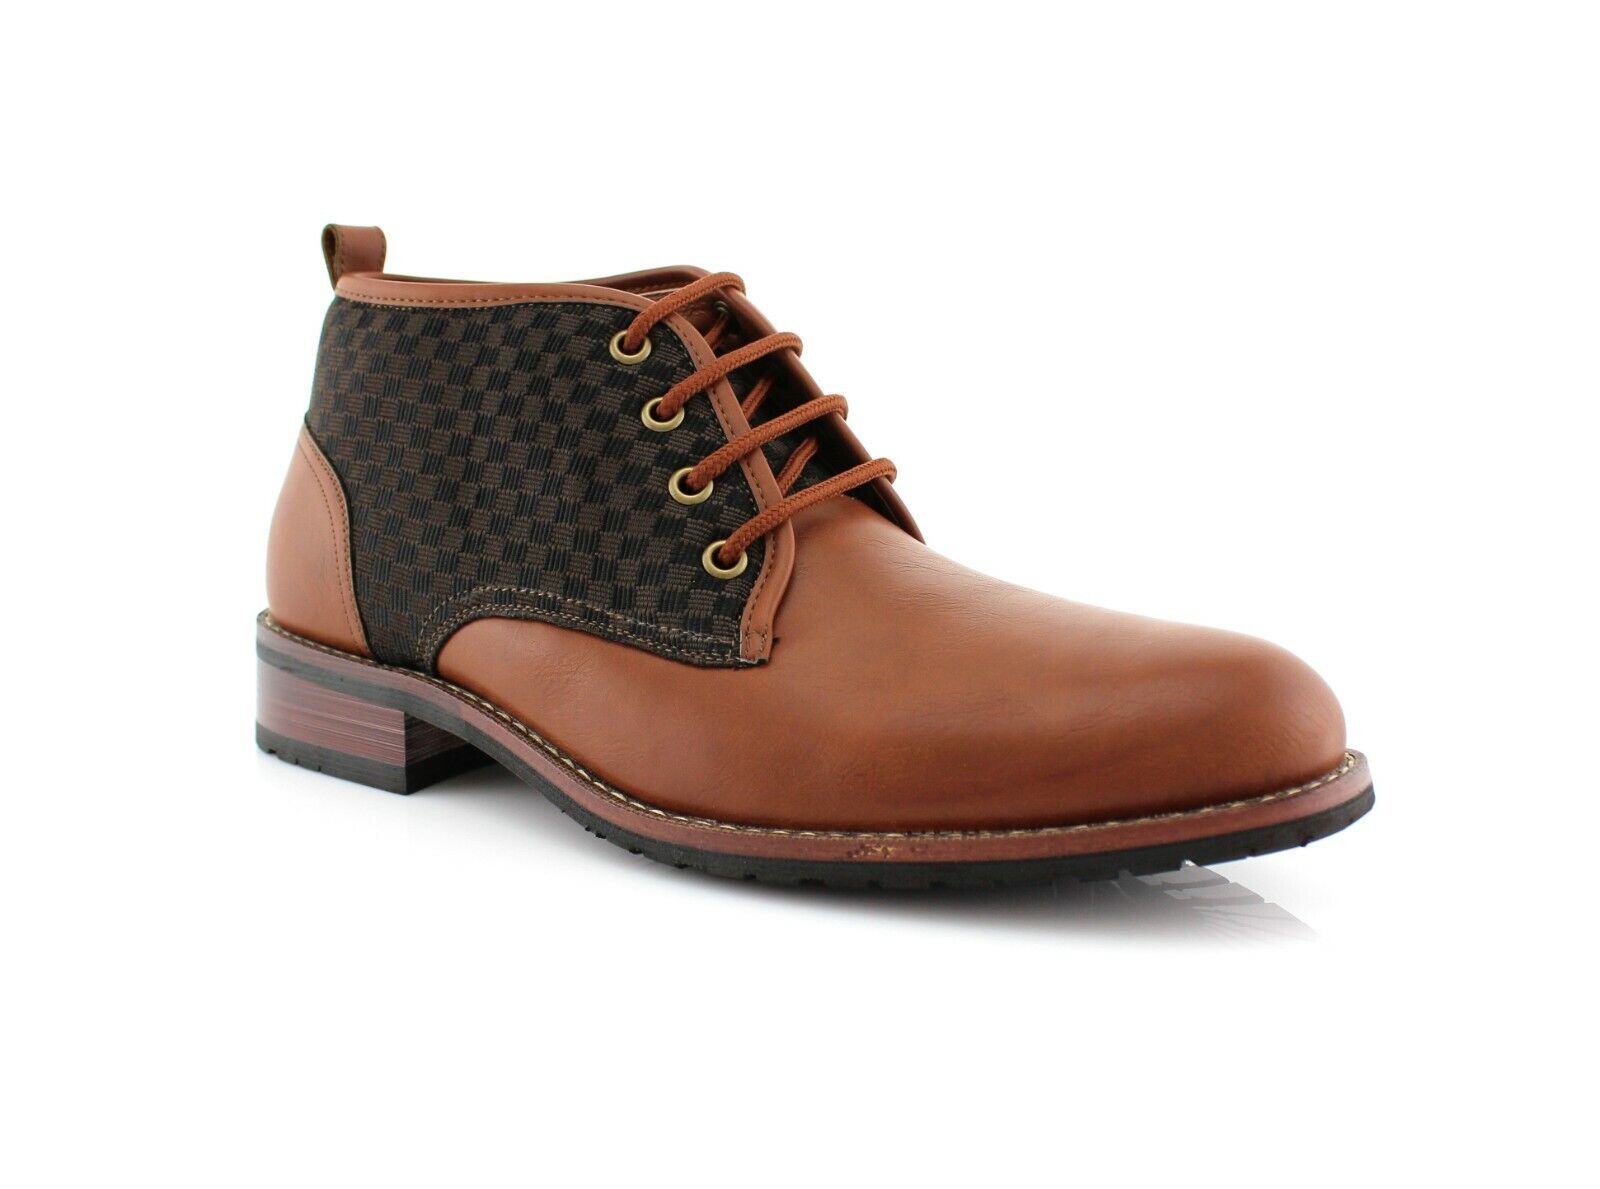 's Ankle Boots Lace Up Contrast Brown Casual Shoes